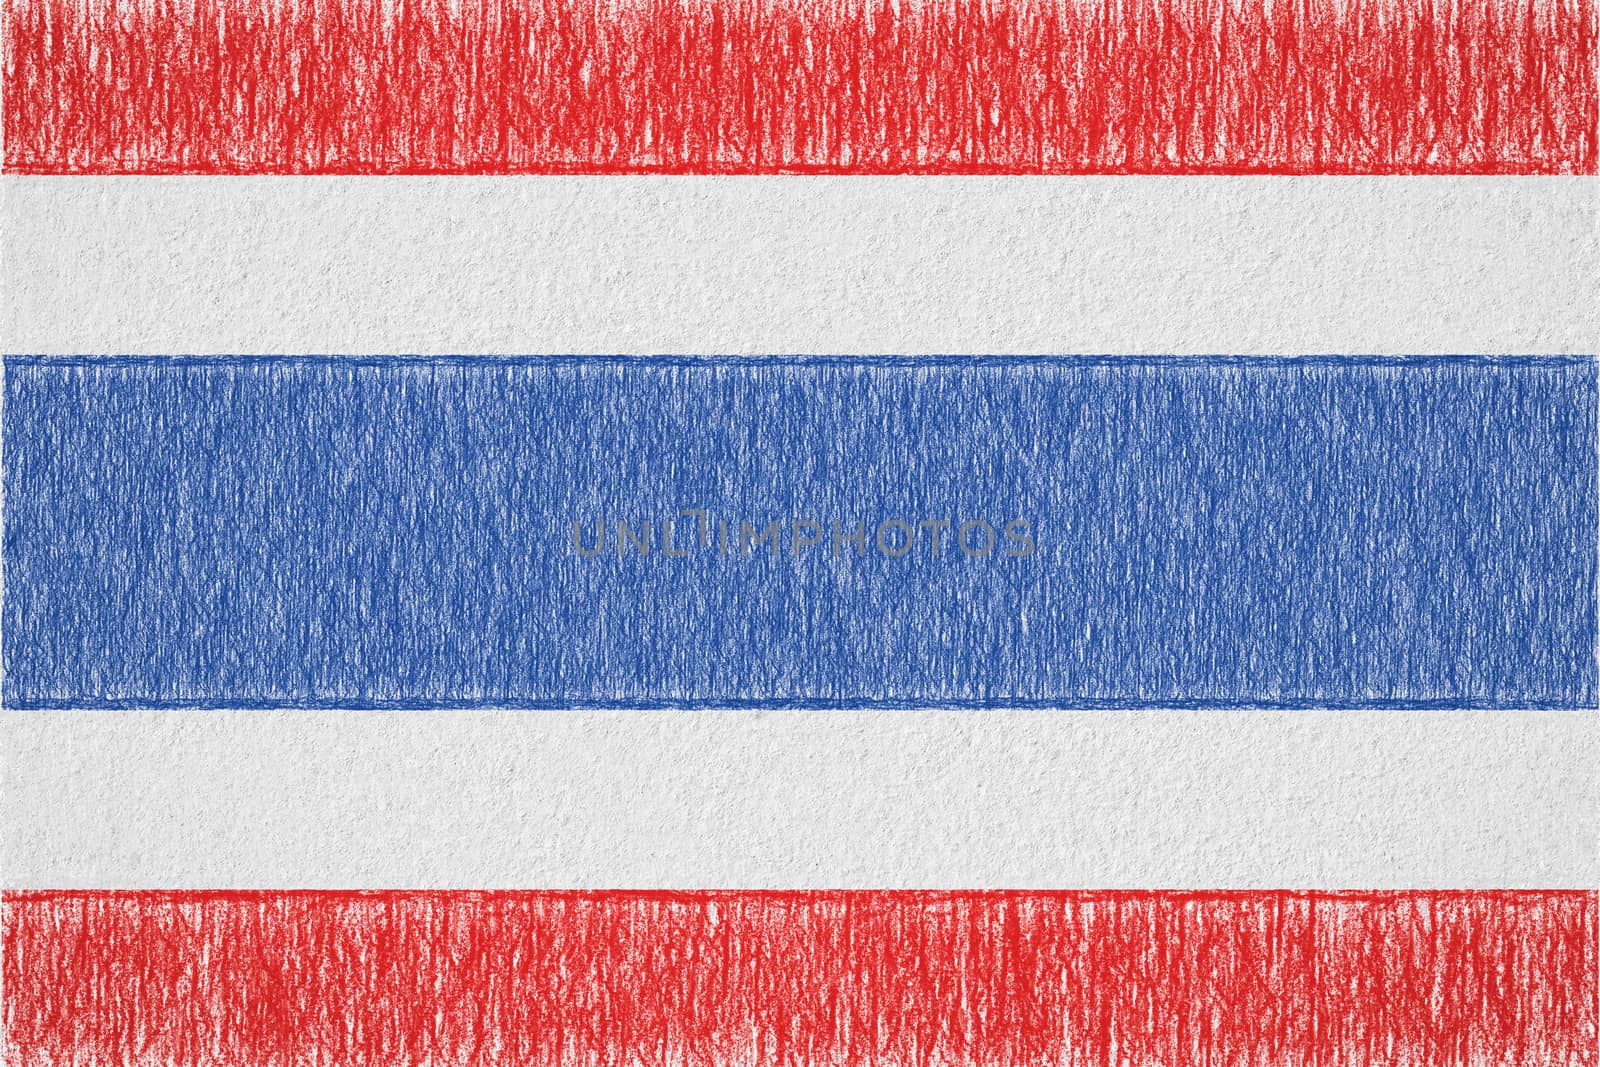 Thailand painted flag by Visual-Content